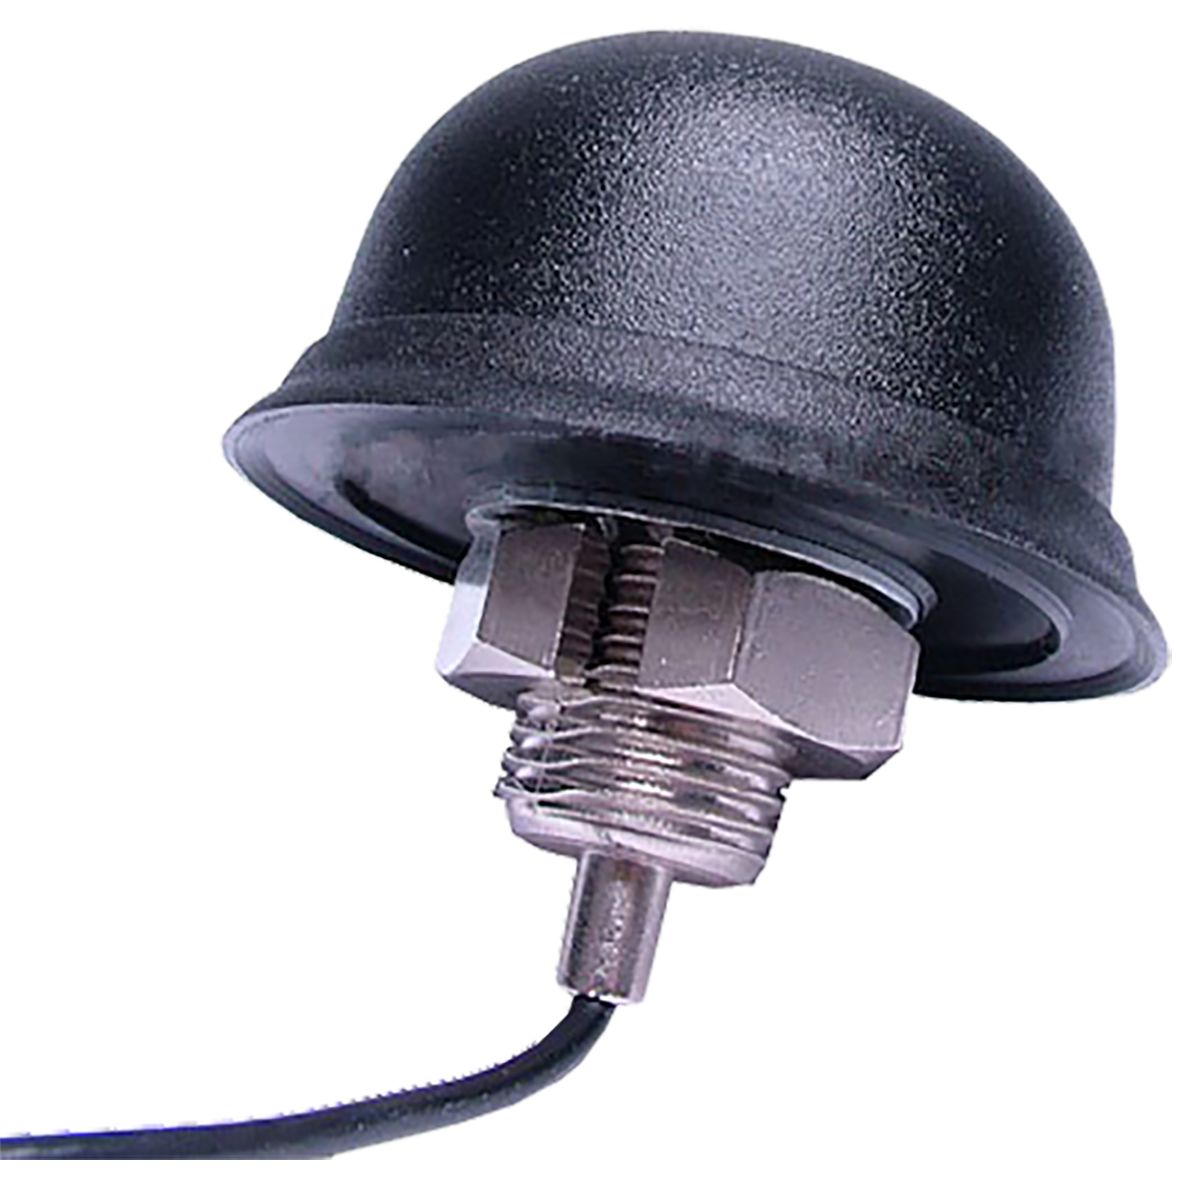 Siretta TANGO17/5M/LL/SMAM/S/S/26 Dome Antenna with SMA Connector, 2G (GSM/GPRS), 3G (UTMS)